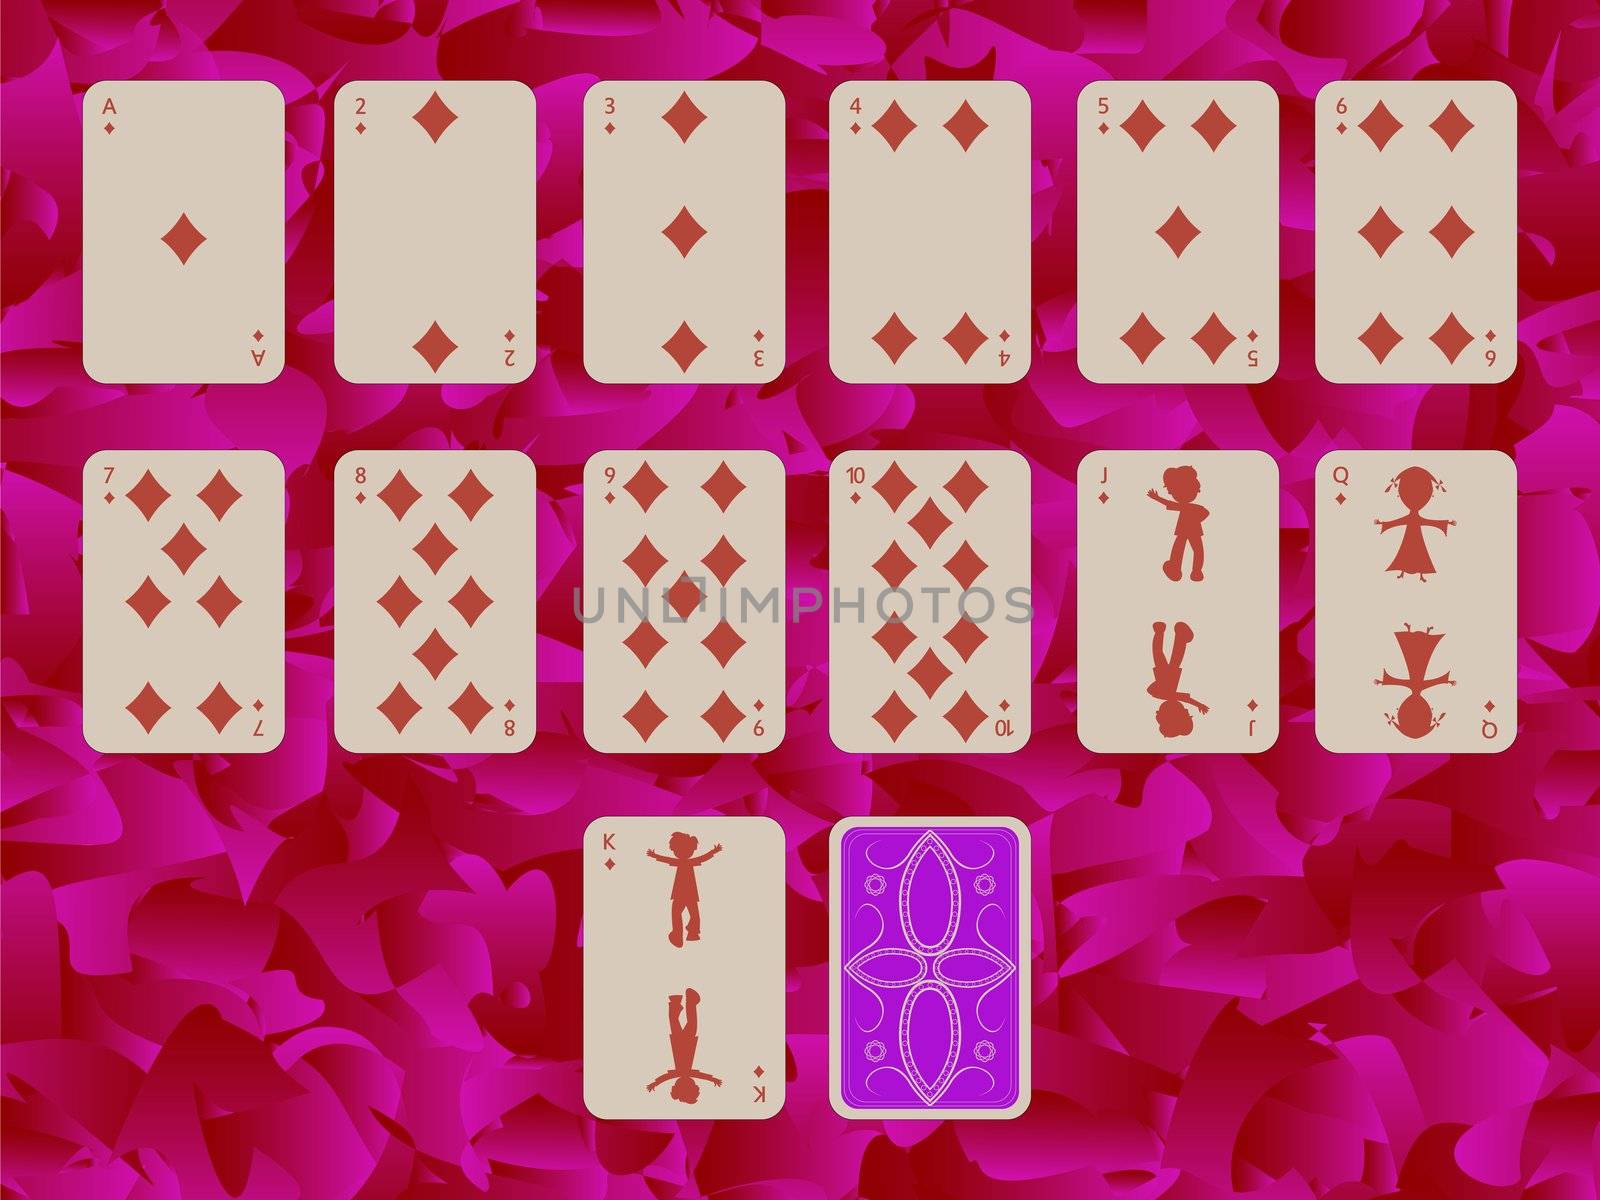 suit of diams playing cards on purple background by robertosch